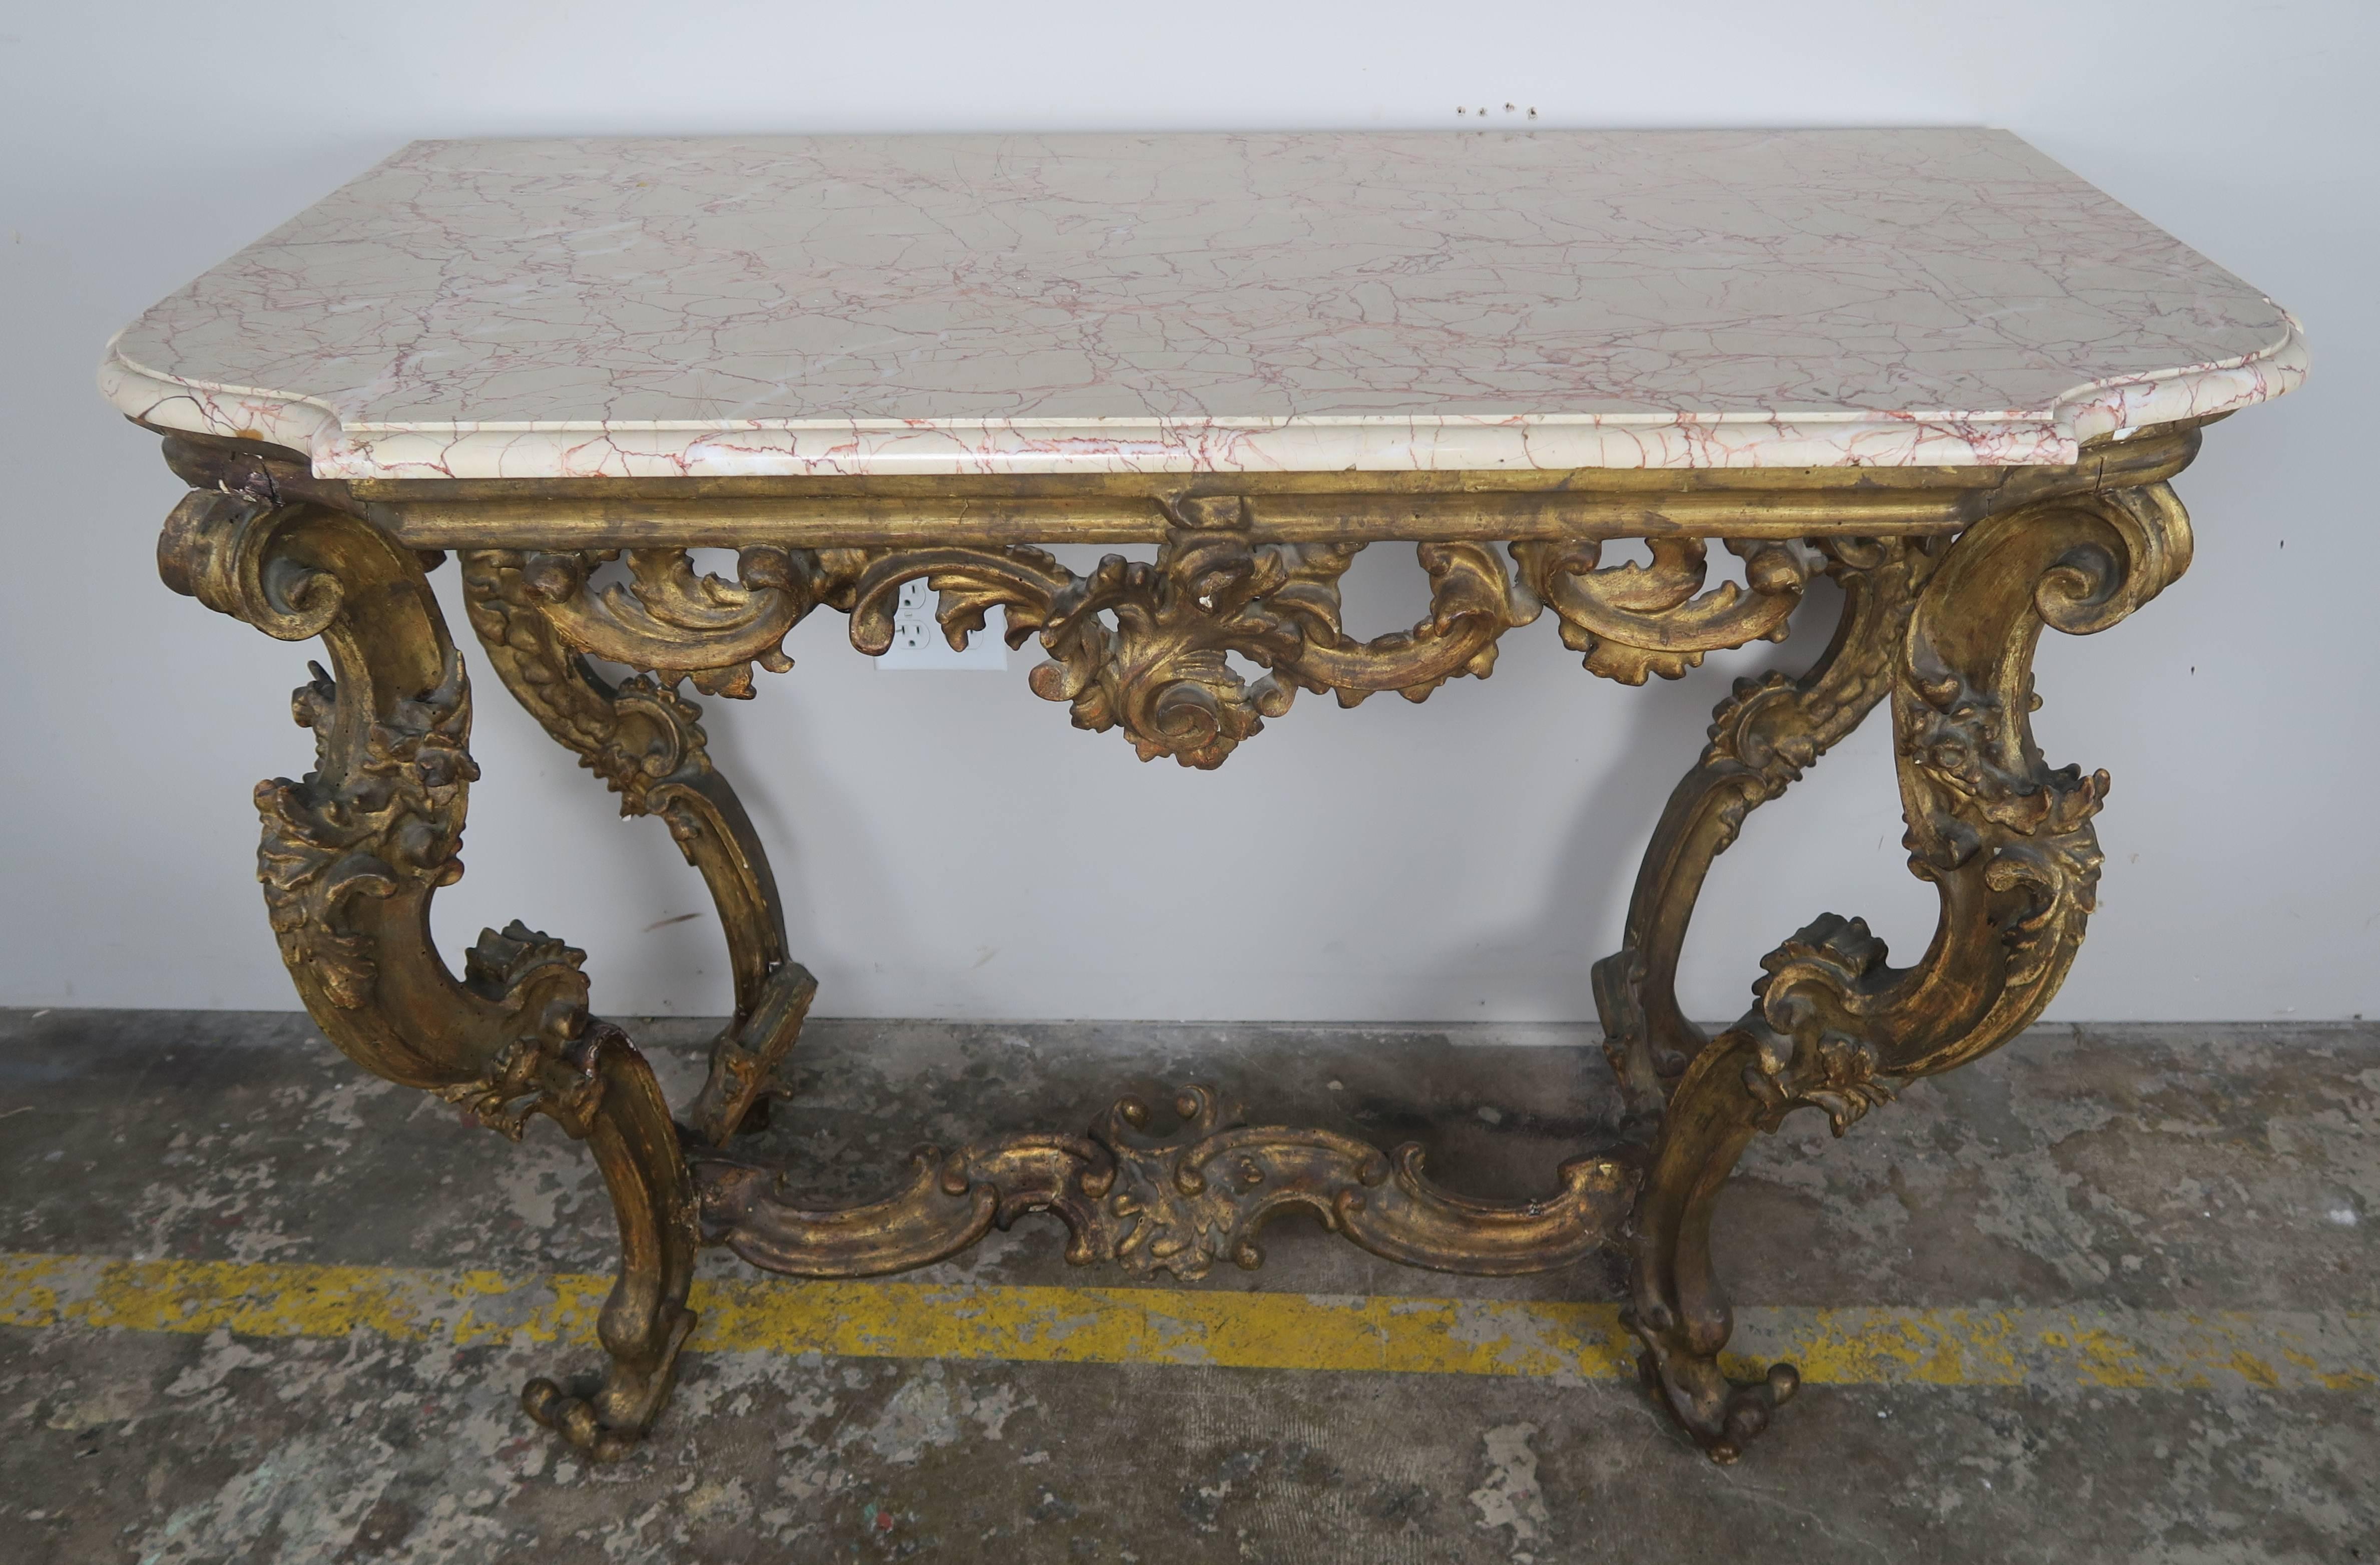 19th century Italian Rococo style giltwood carved console with marble top with a single ogee edge detail. The console is beautifully carved and adorned with garlands of flowers twisting around the scrolled legs and acanthus leaves swirling together